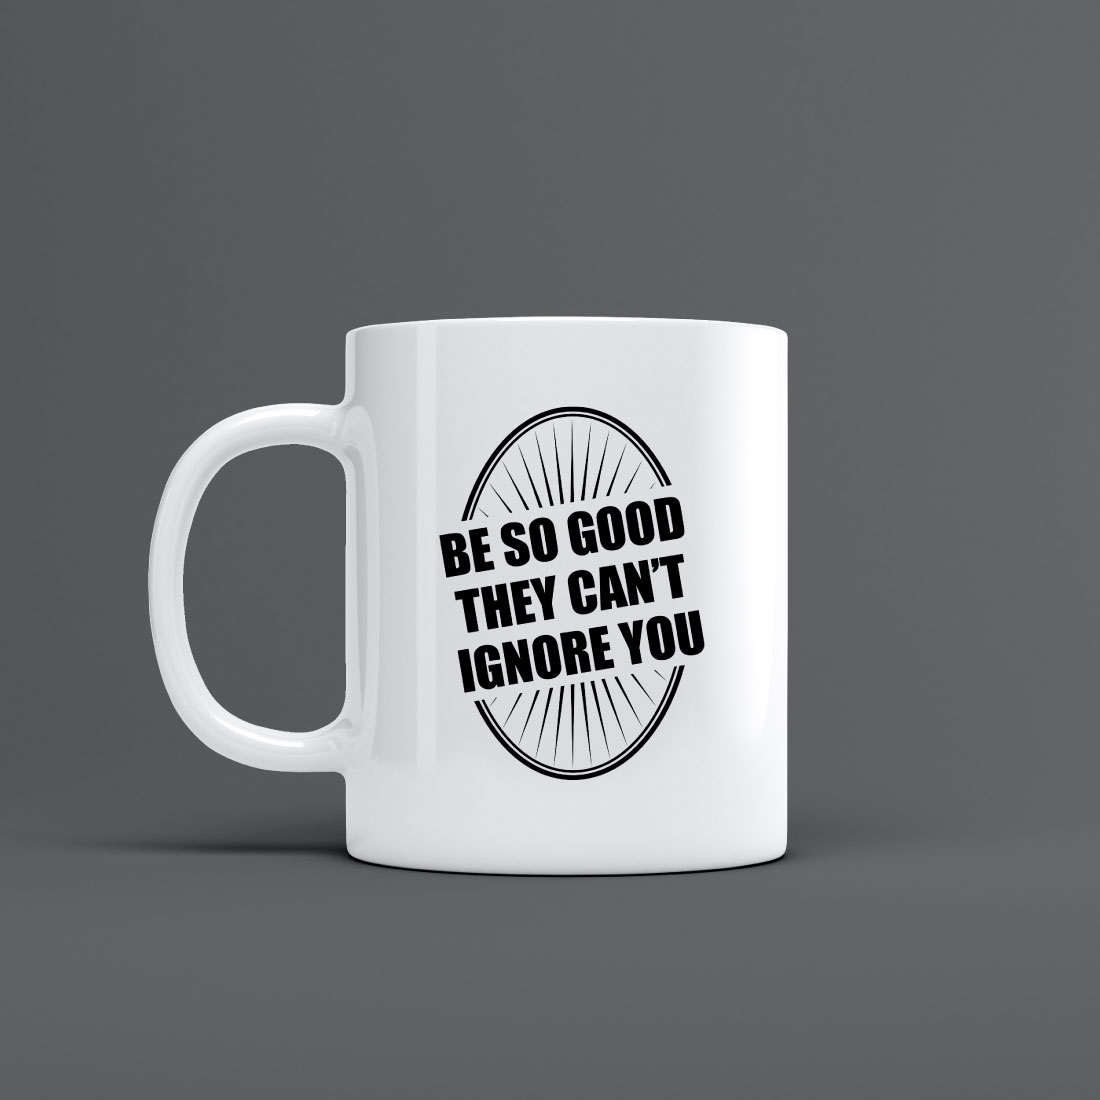 be so good they cant ignore you mug design 88